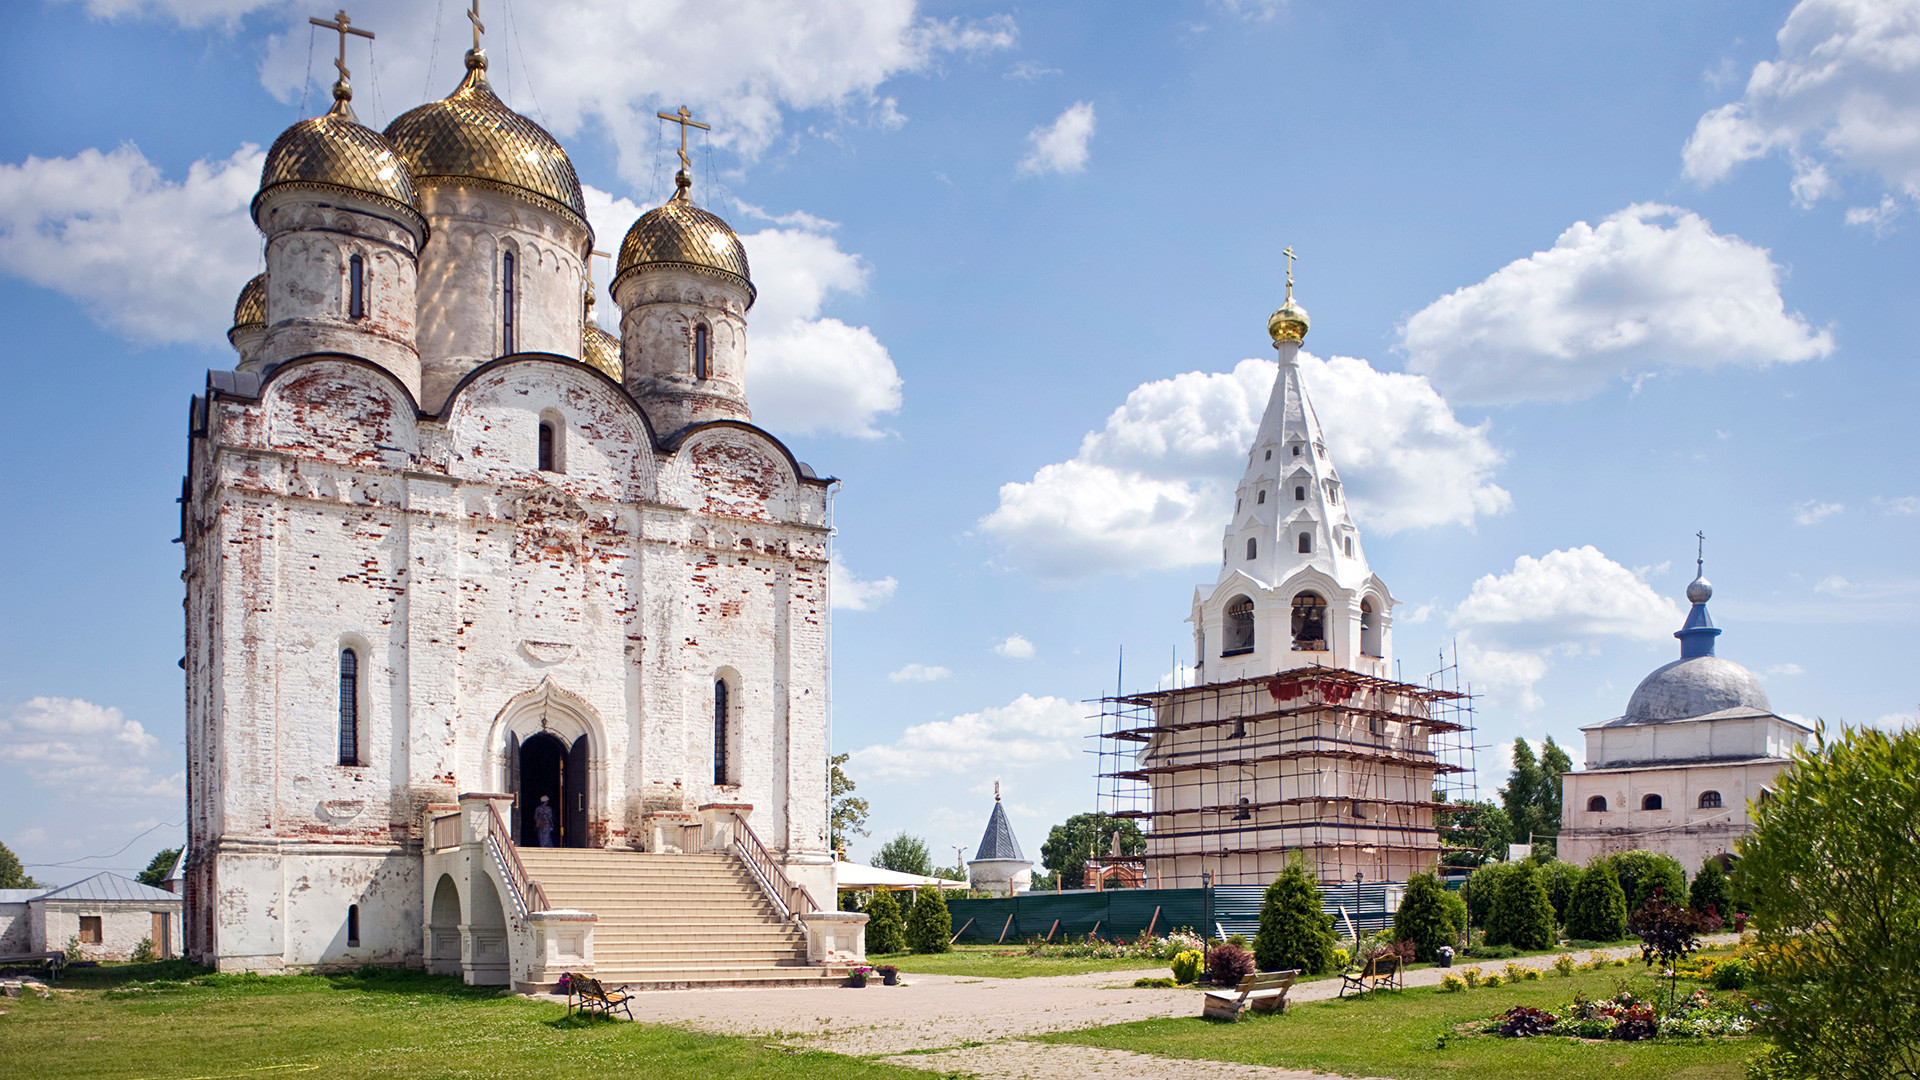 Mozhaisk. Luzhetsky-St. Ferapont-Nativity of the Virgin Monastery, northwest view. From left: Nativity Cathedral, bell tower, Church of Transfiguration over Holy Gates. July 5, 2015.